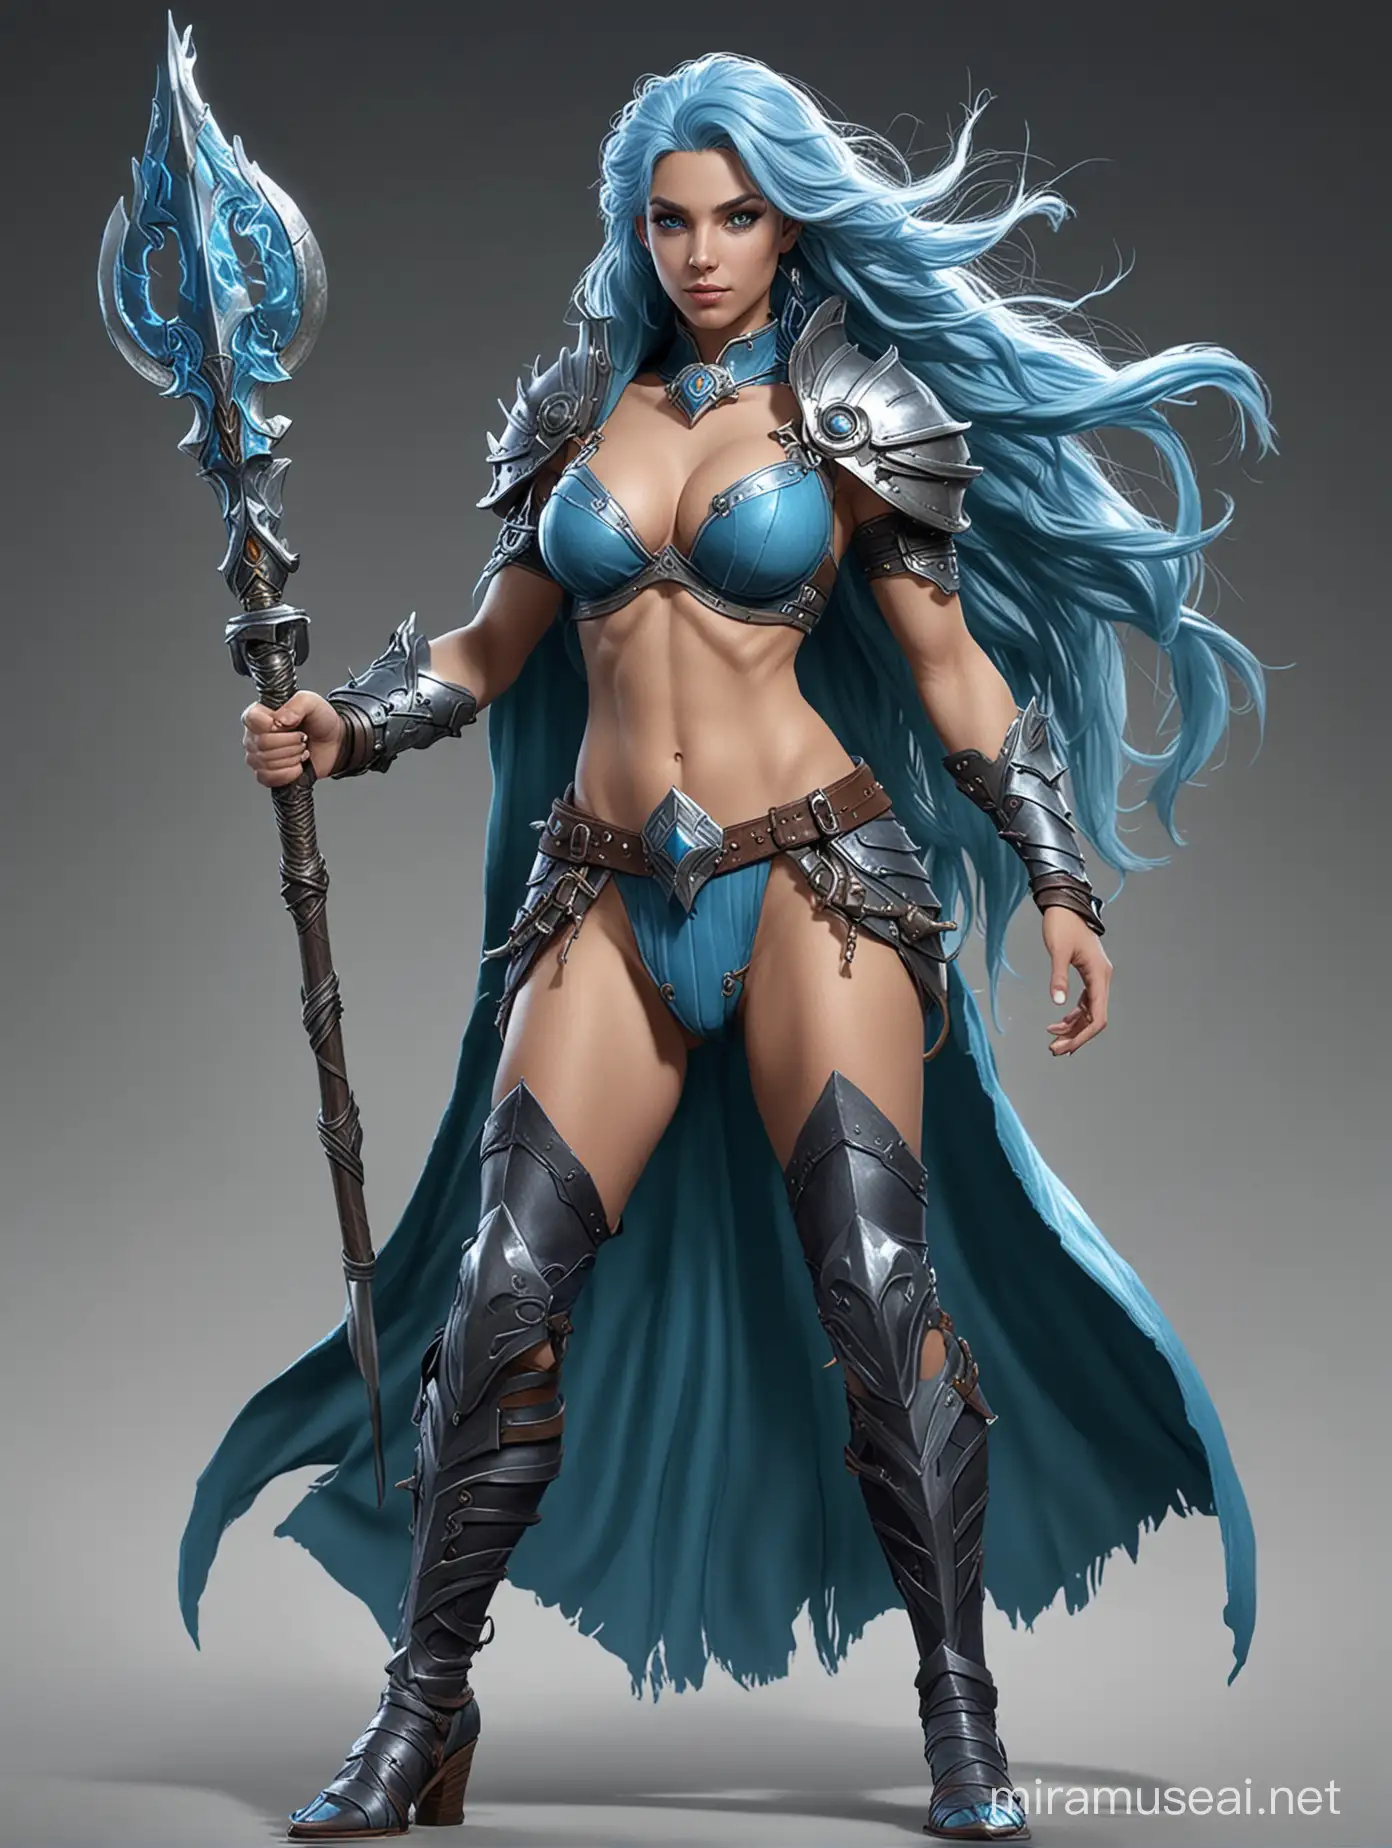 Tempest Cleric Triton Summoning Storm Mystical Female with Blue Skin and Flowing Hair